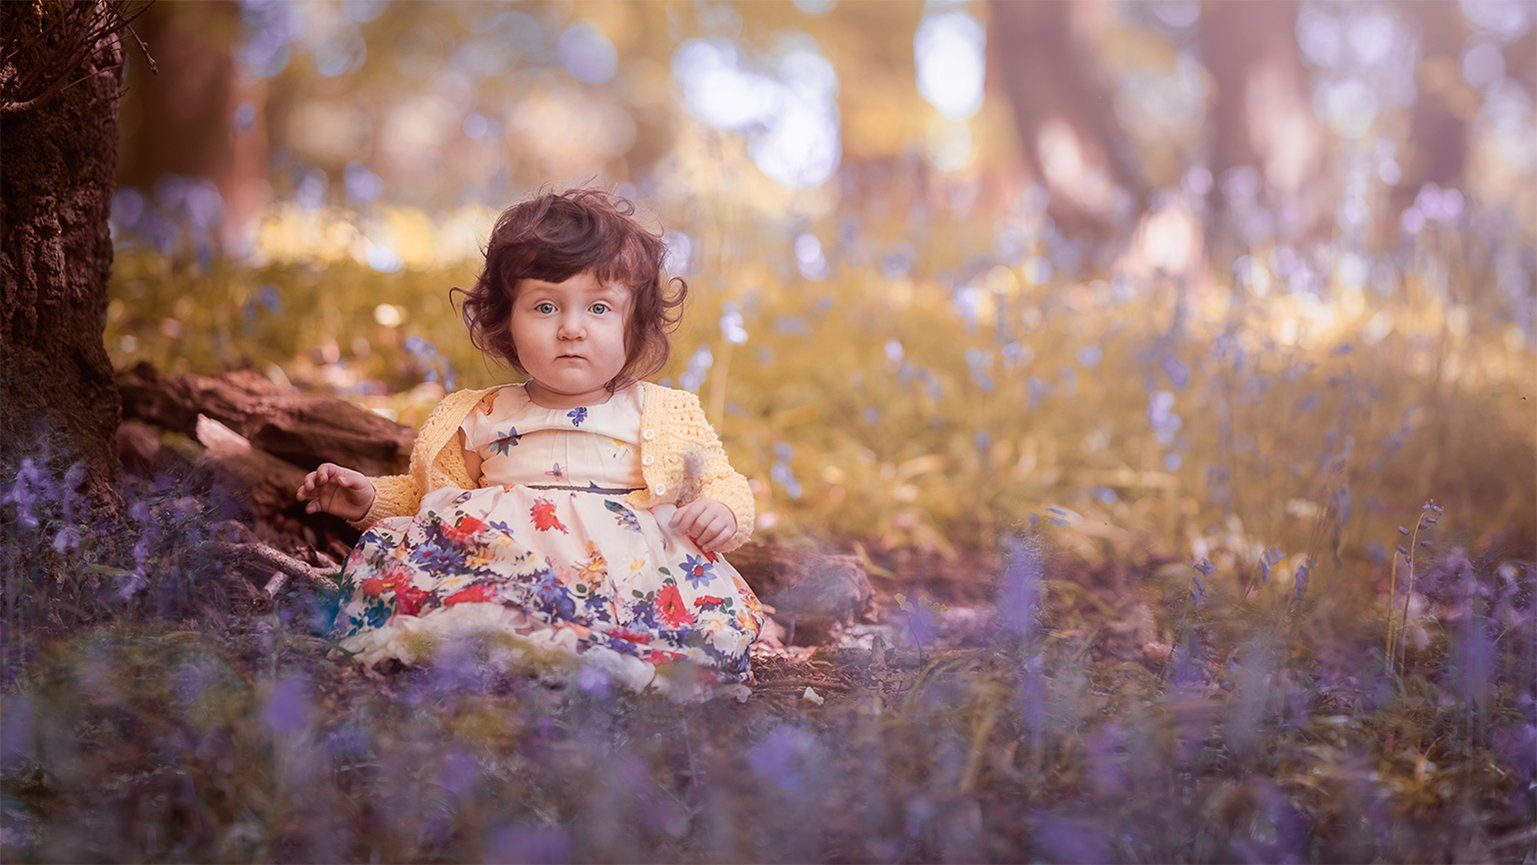 Toddler photoshoot in the bluebells under the forest canopy